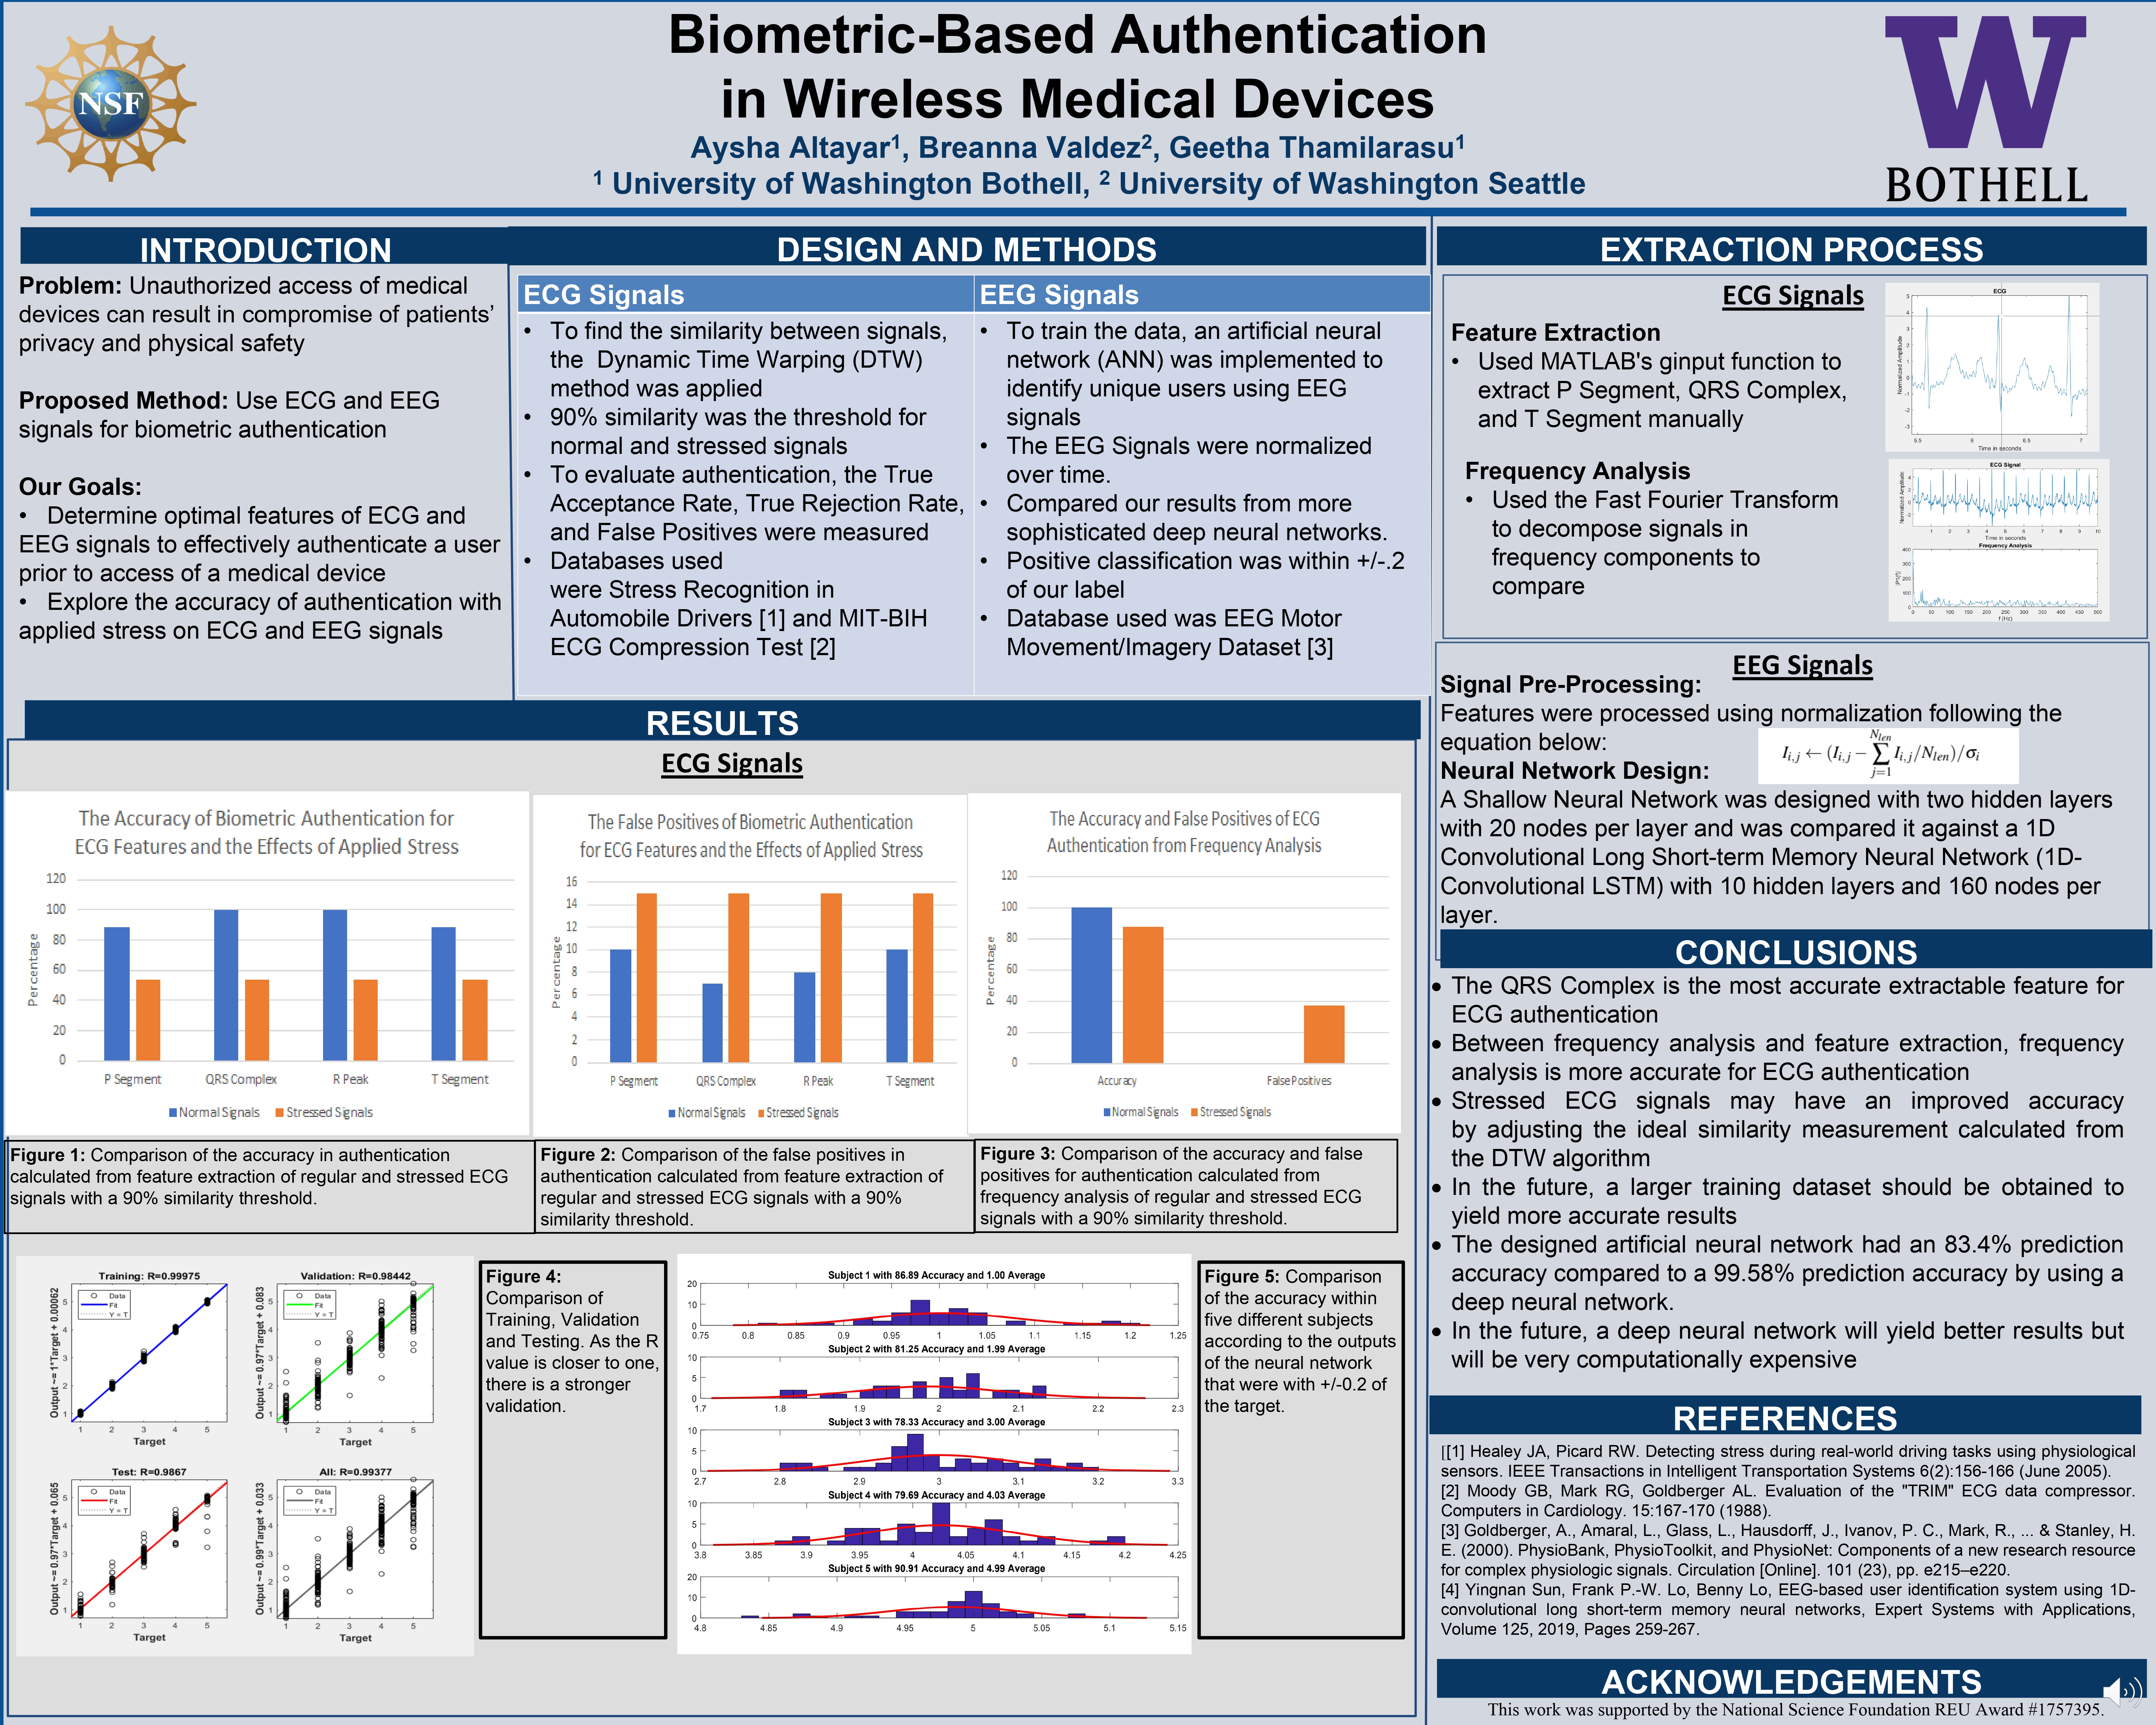 Investigating ECG features for authentication in wireless medical devices Poster